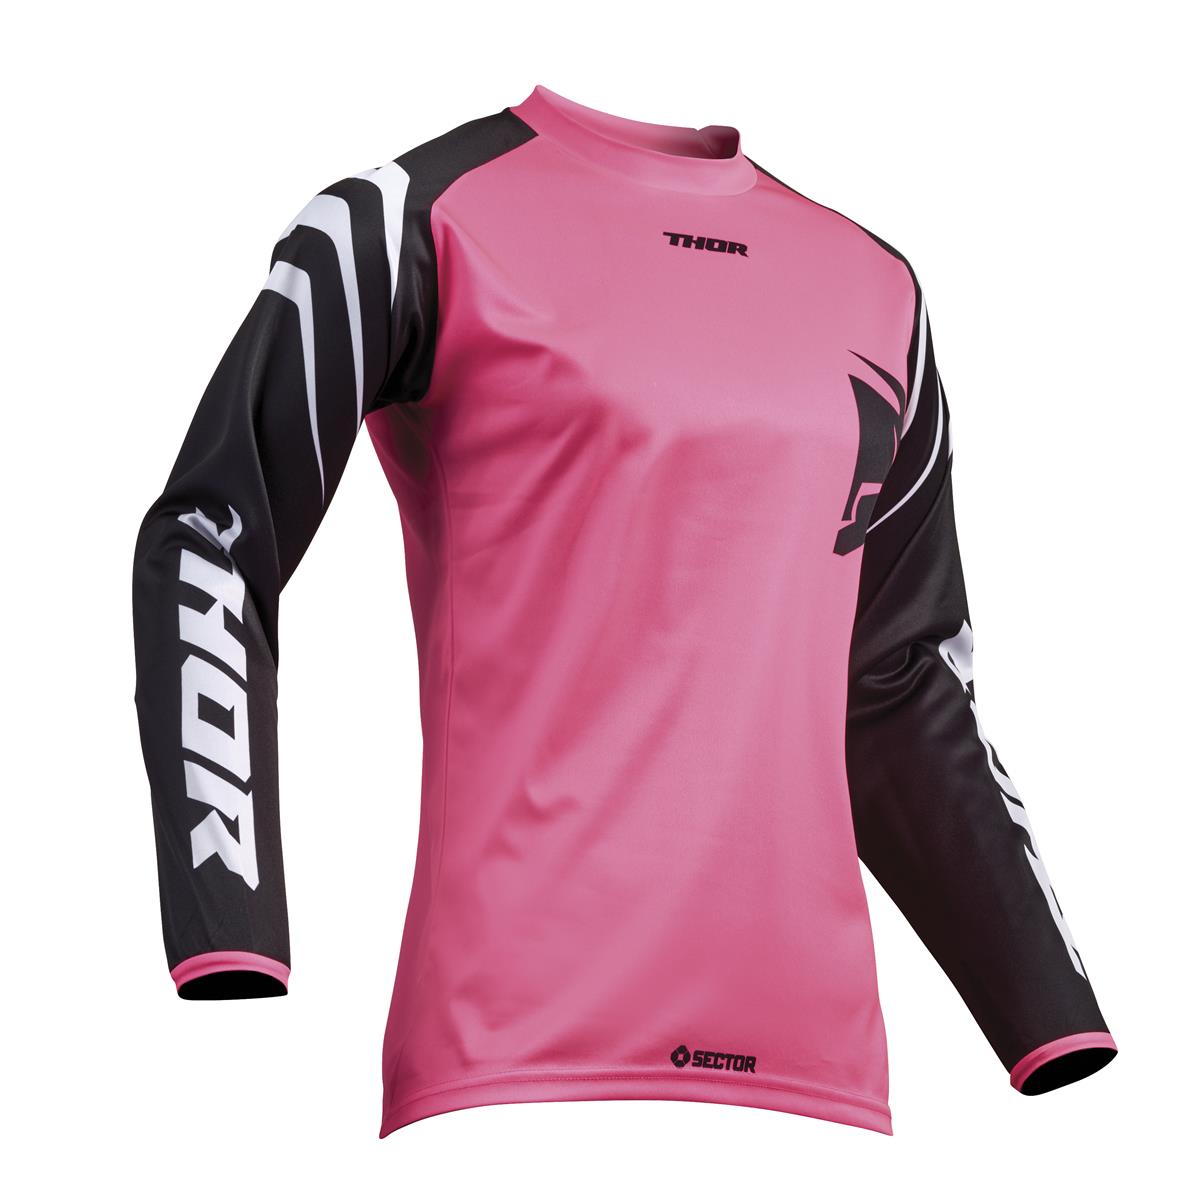 Thor Girls Jersey Sector Zones - Black/Pink